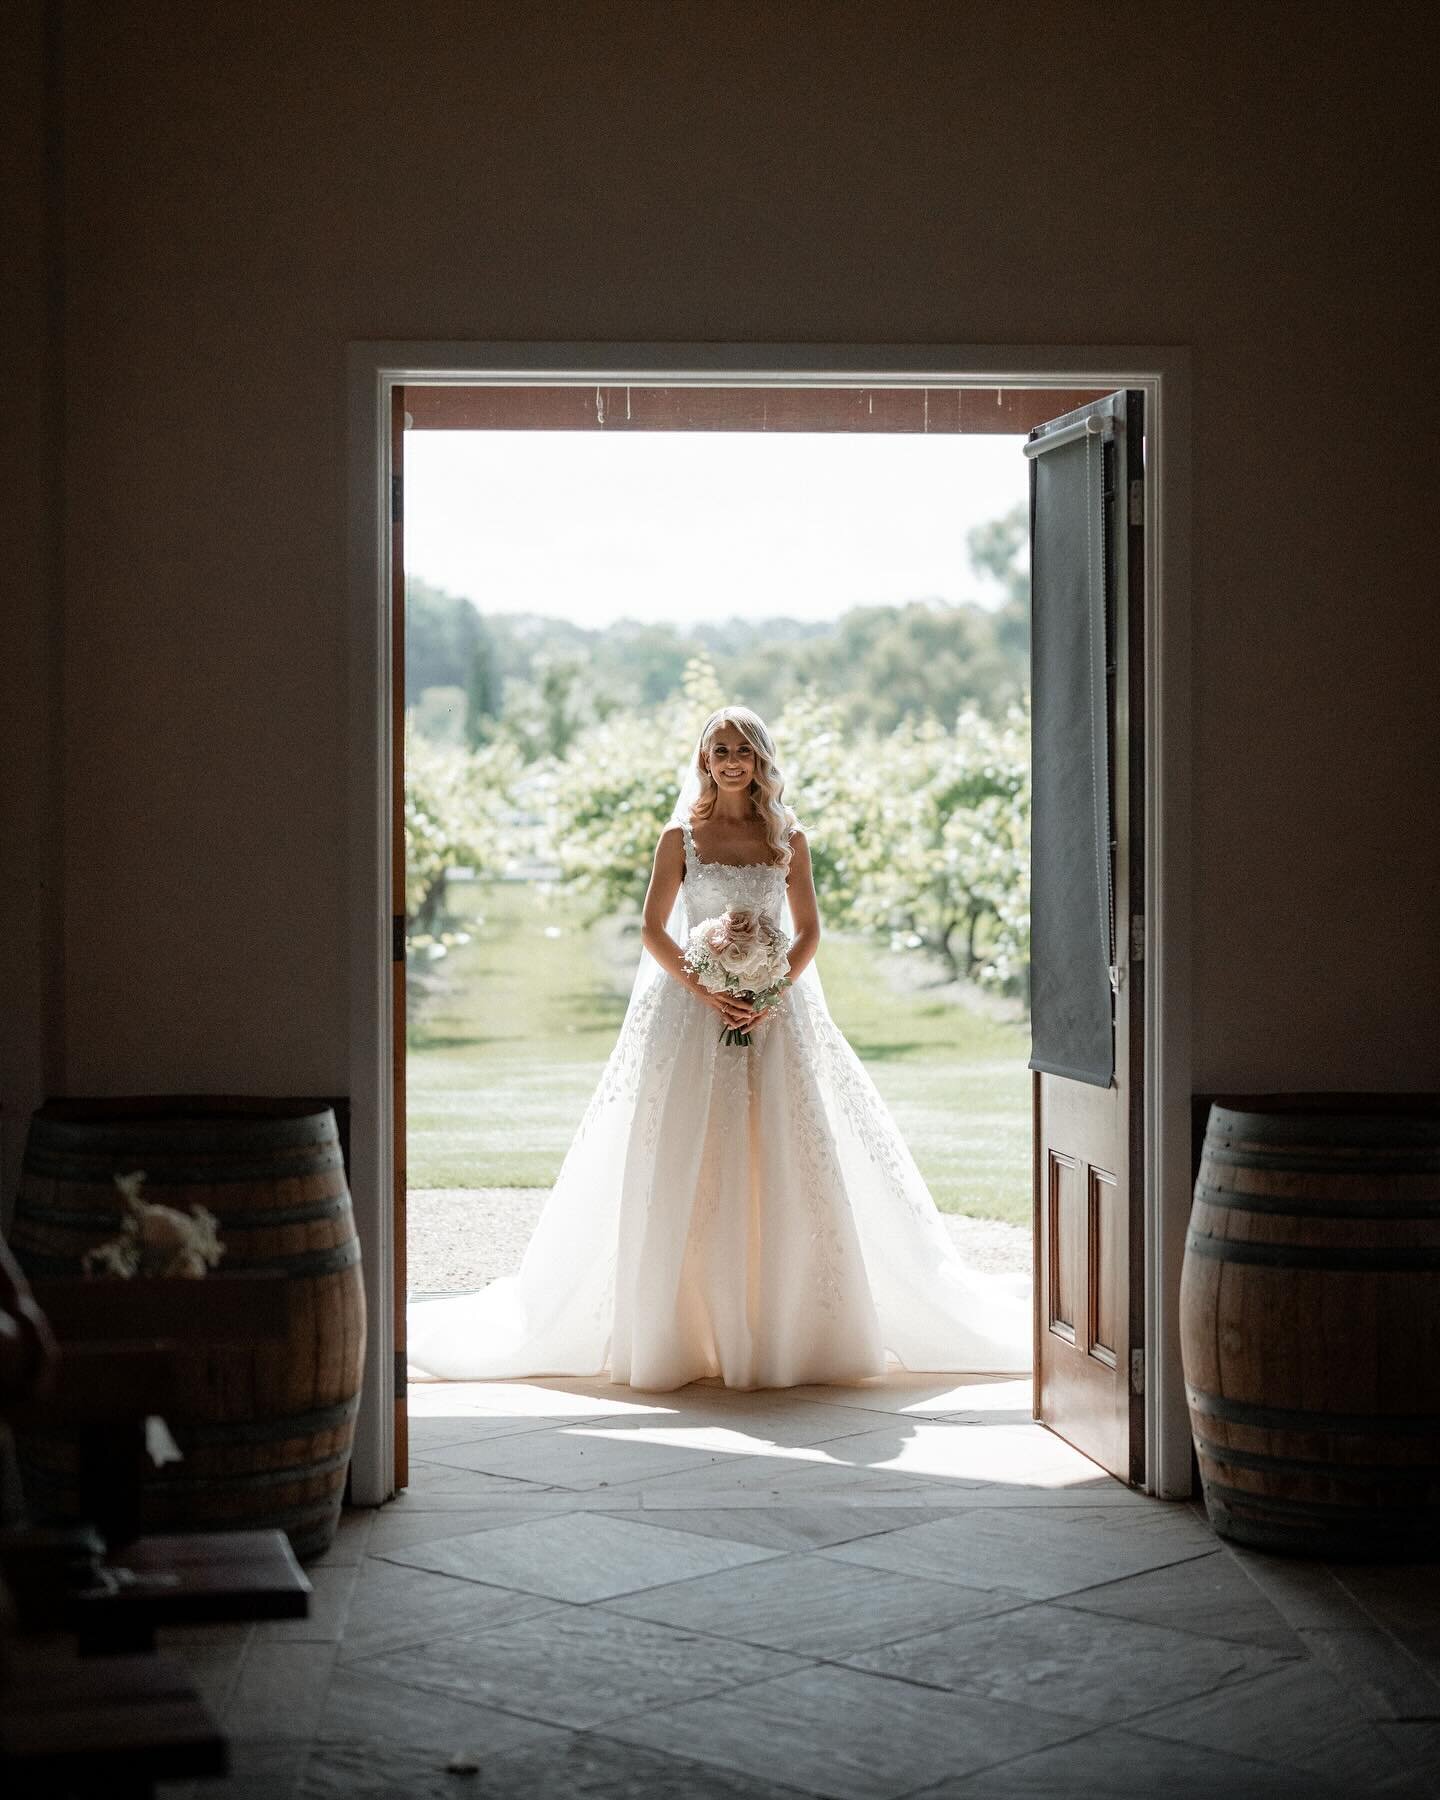 ~ Elegance ~

Utterly breathtaking&hellip;
Paula and Corey created a celebration that was genuine, authentic and so incredibly real.

Thank you Corey and Paula for having me part of your special day. 
I am an incredibly fortunate celebrant who gets t